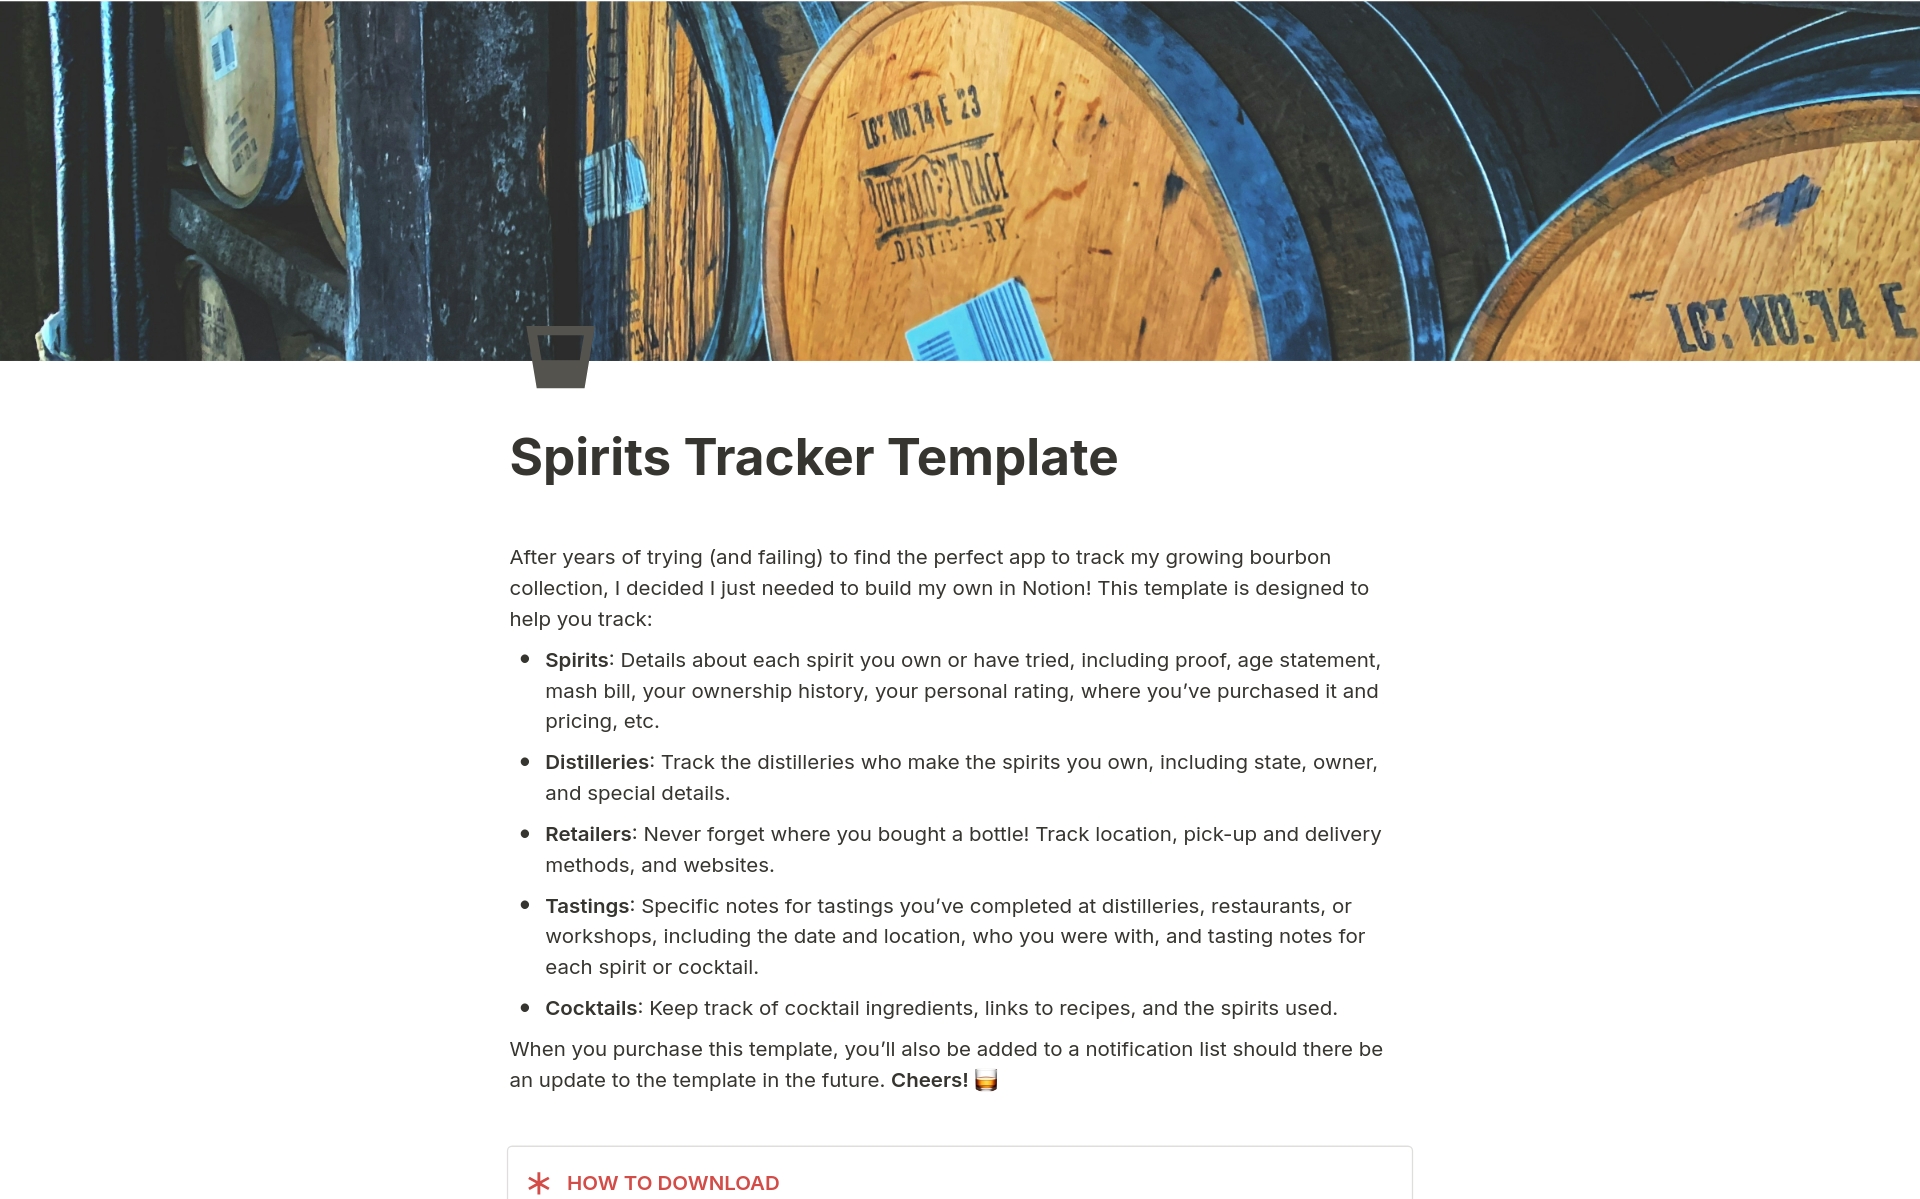 Designed to help you track your personal spirits collection, including distilleries, retailers, tastings, and cocktails. This template comes with two versions: a template which includes sample data, and a clean dashboard without the sample data.